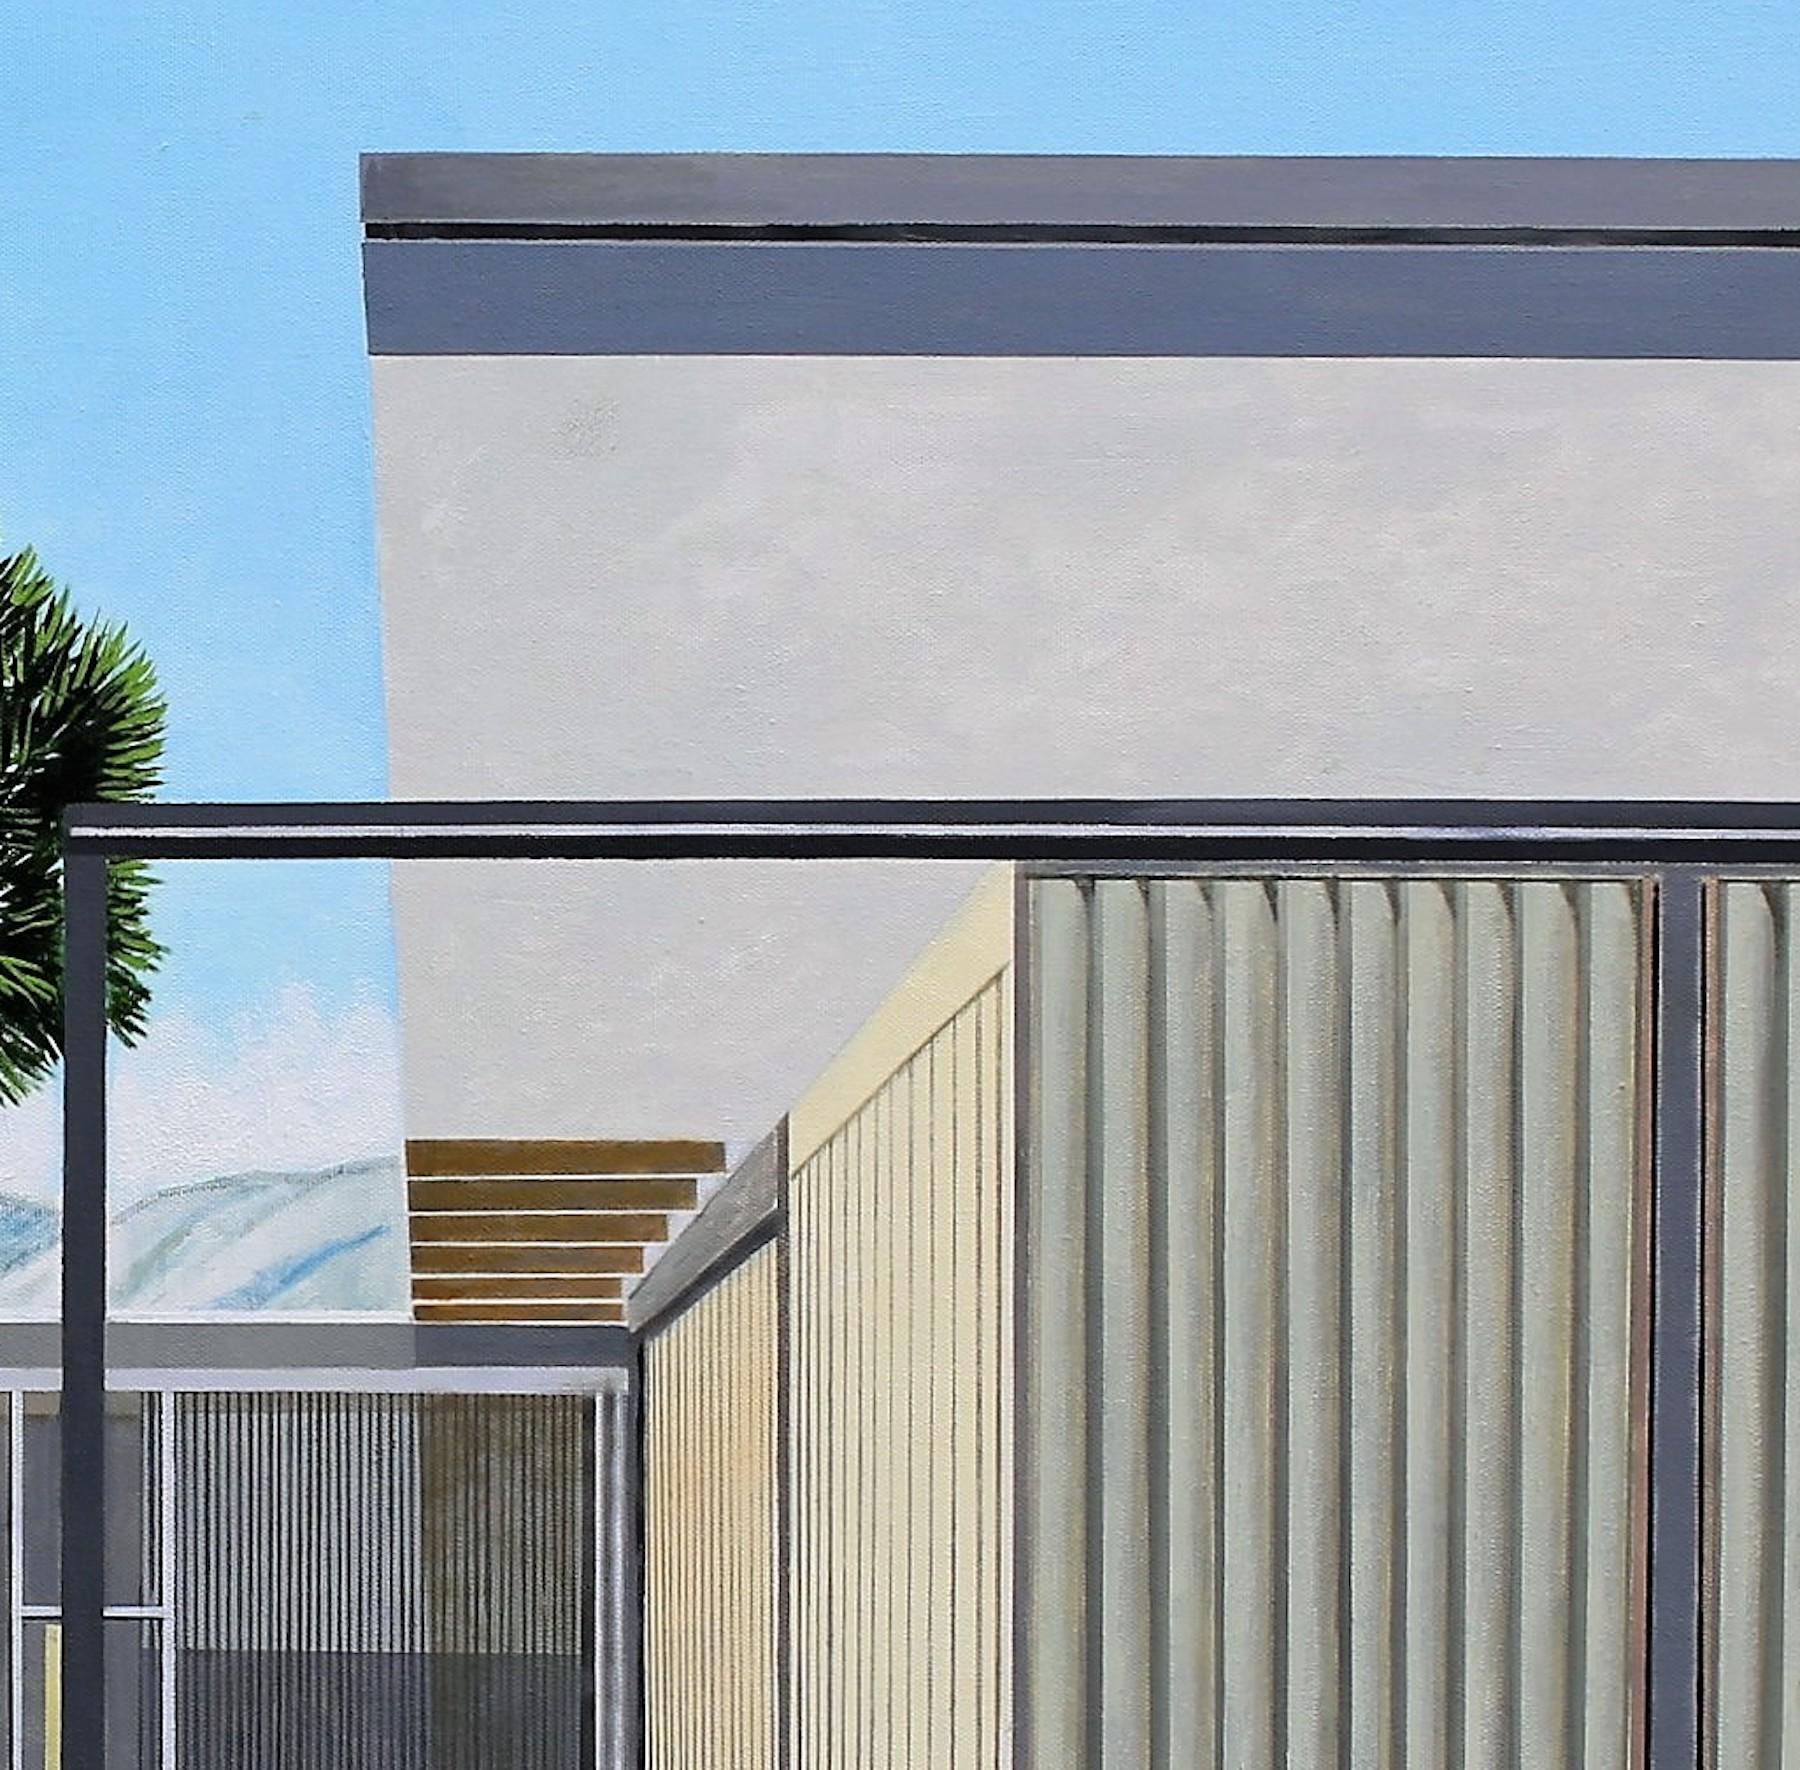 This is a painting from my architectural series of works. I love this Richard Neutra house and enjoyed painting it and adding my style with sun loungers and various cacti and a limited palette of colours to make an interesting scene of a warm